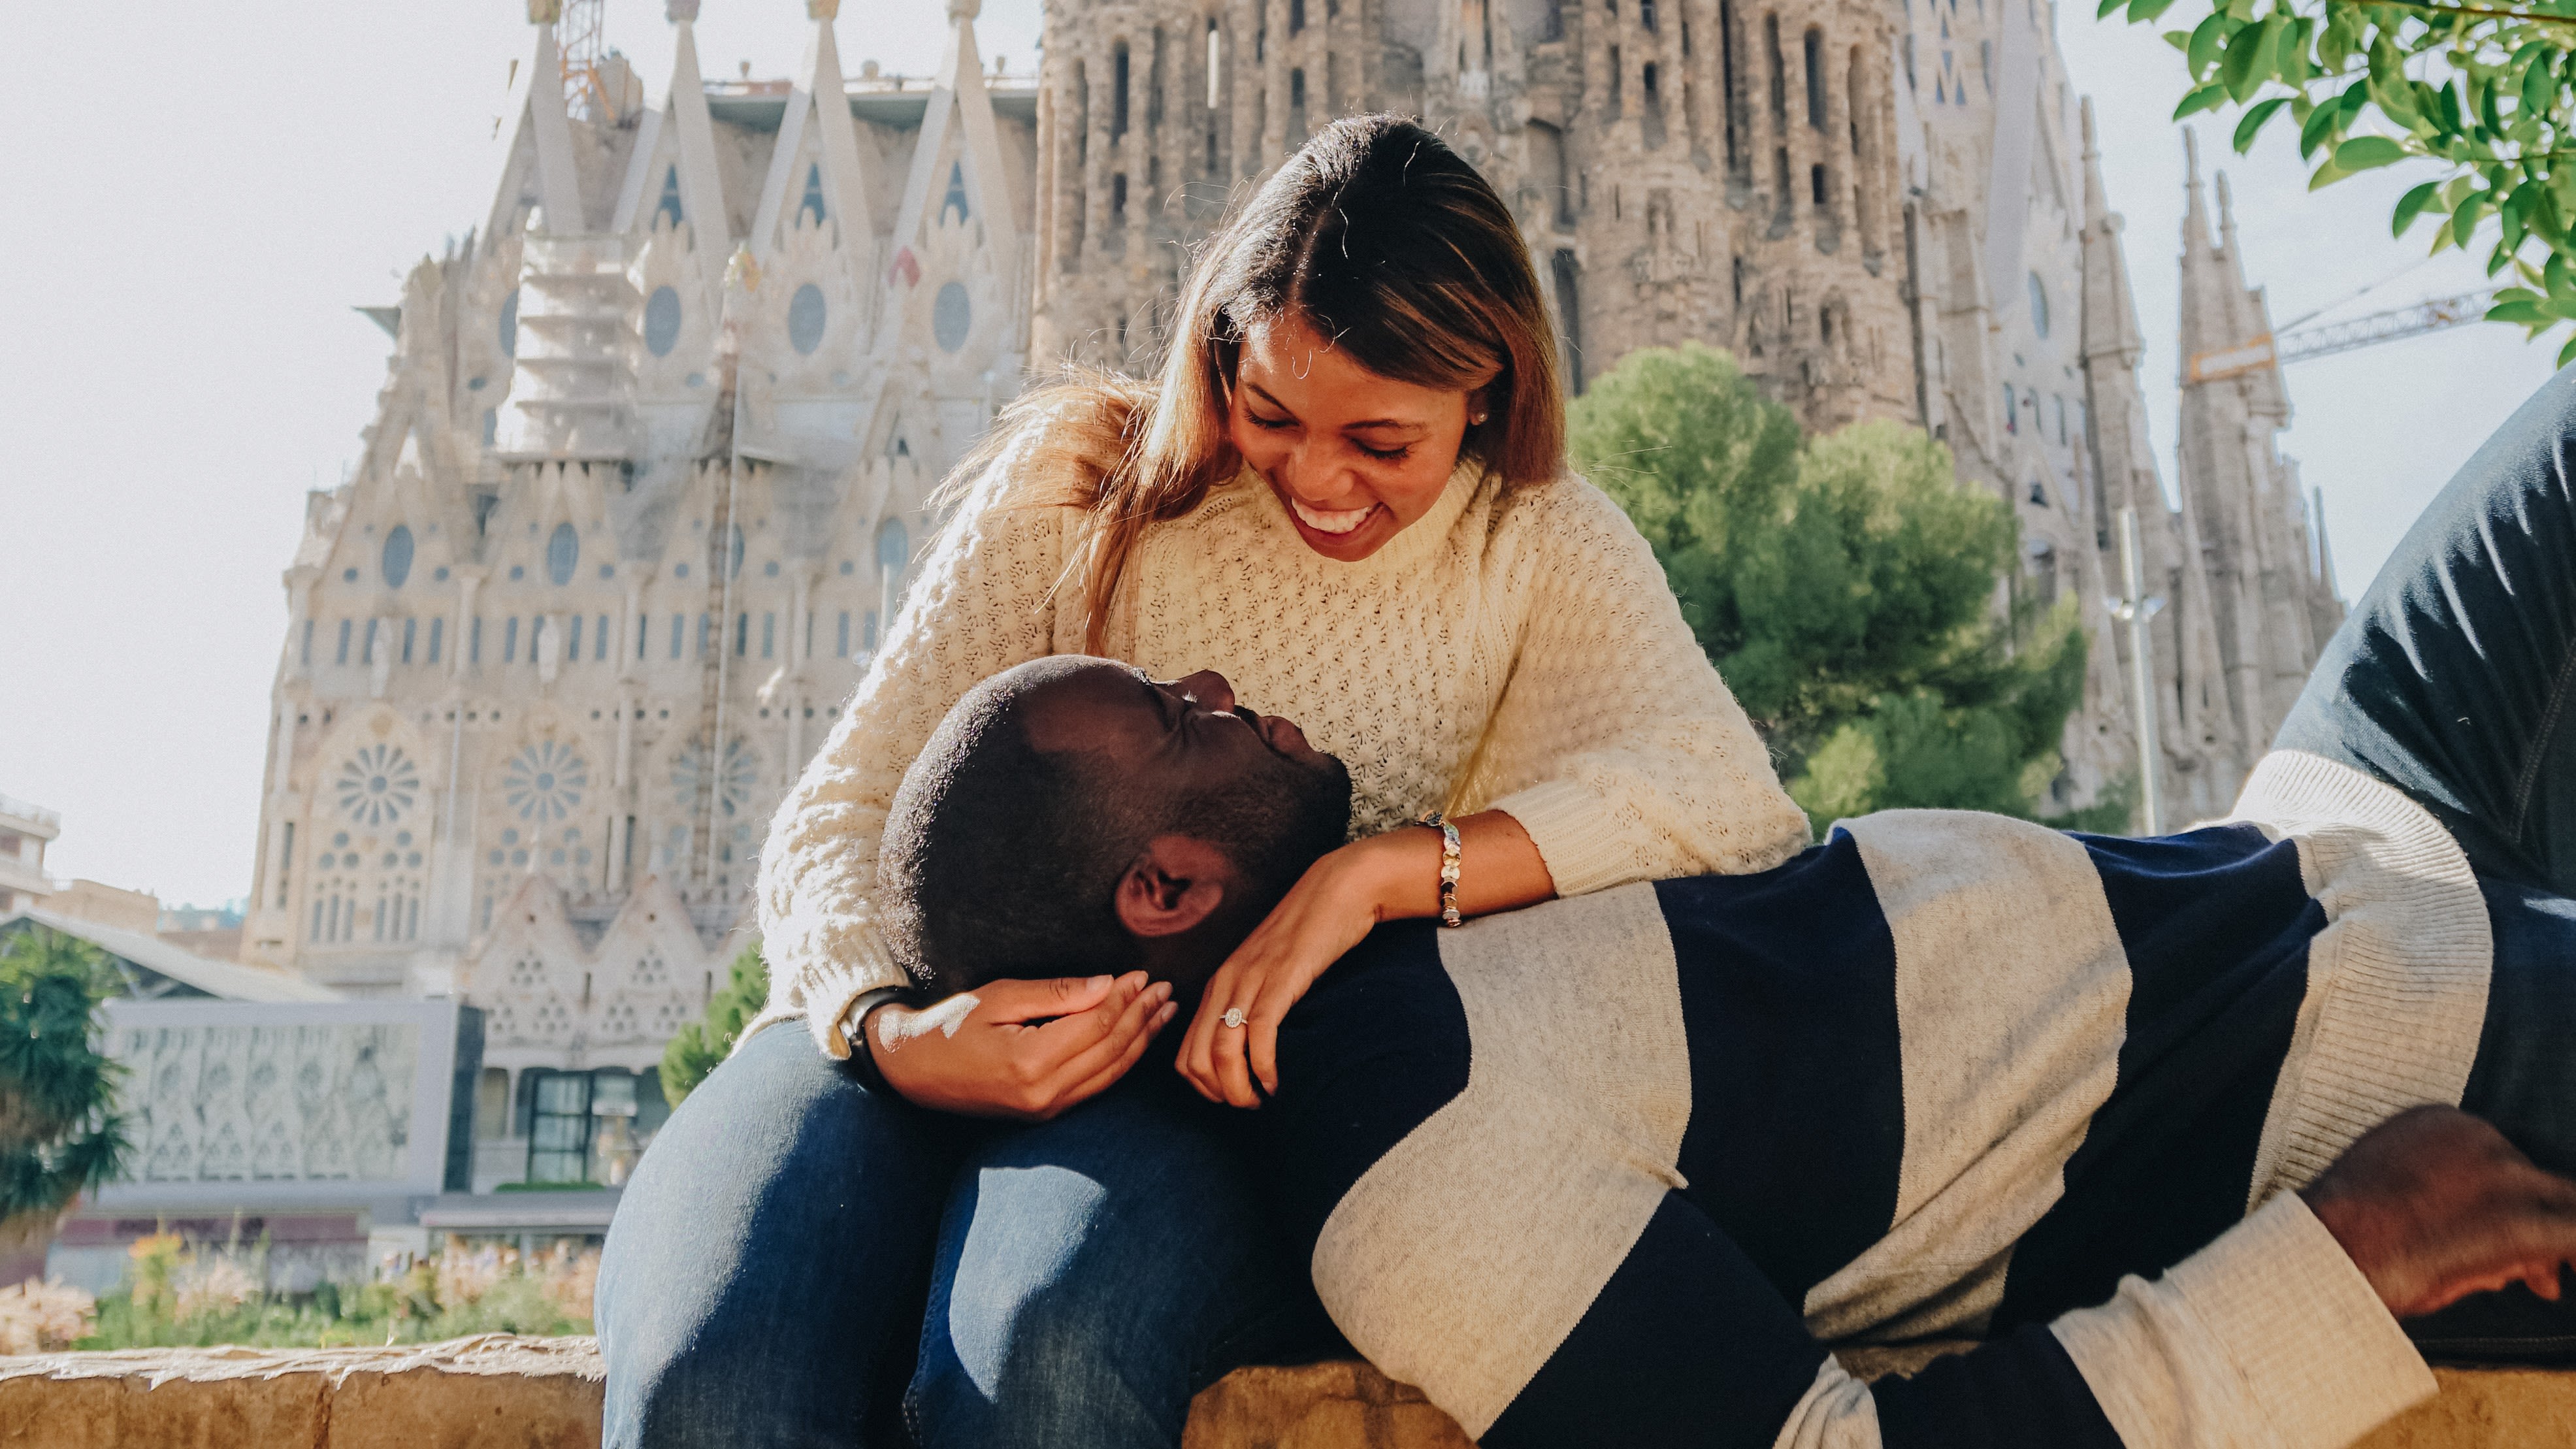 Martina and Leslie hit it off right away when they met on an airplane. Here they are pictured some time later at La Sagrada Familia in Barcelona.